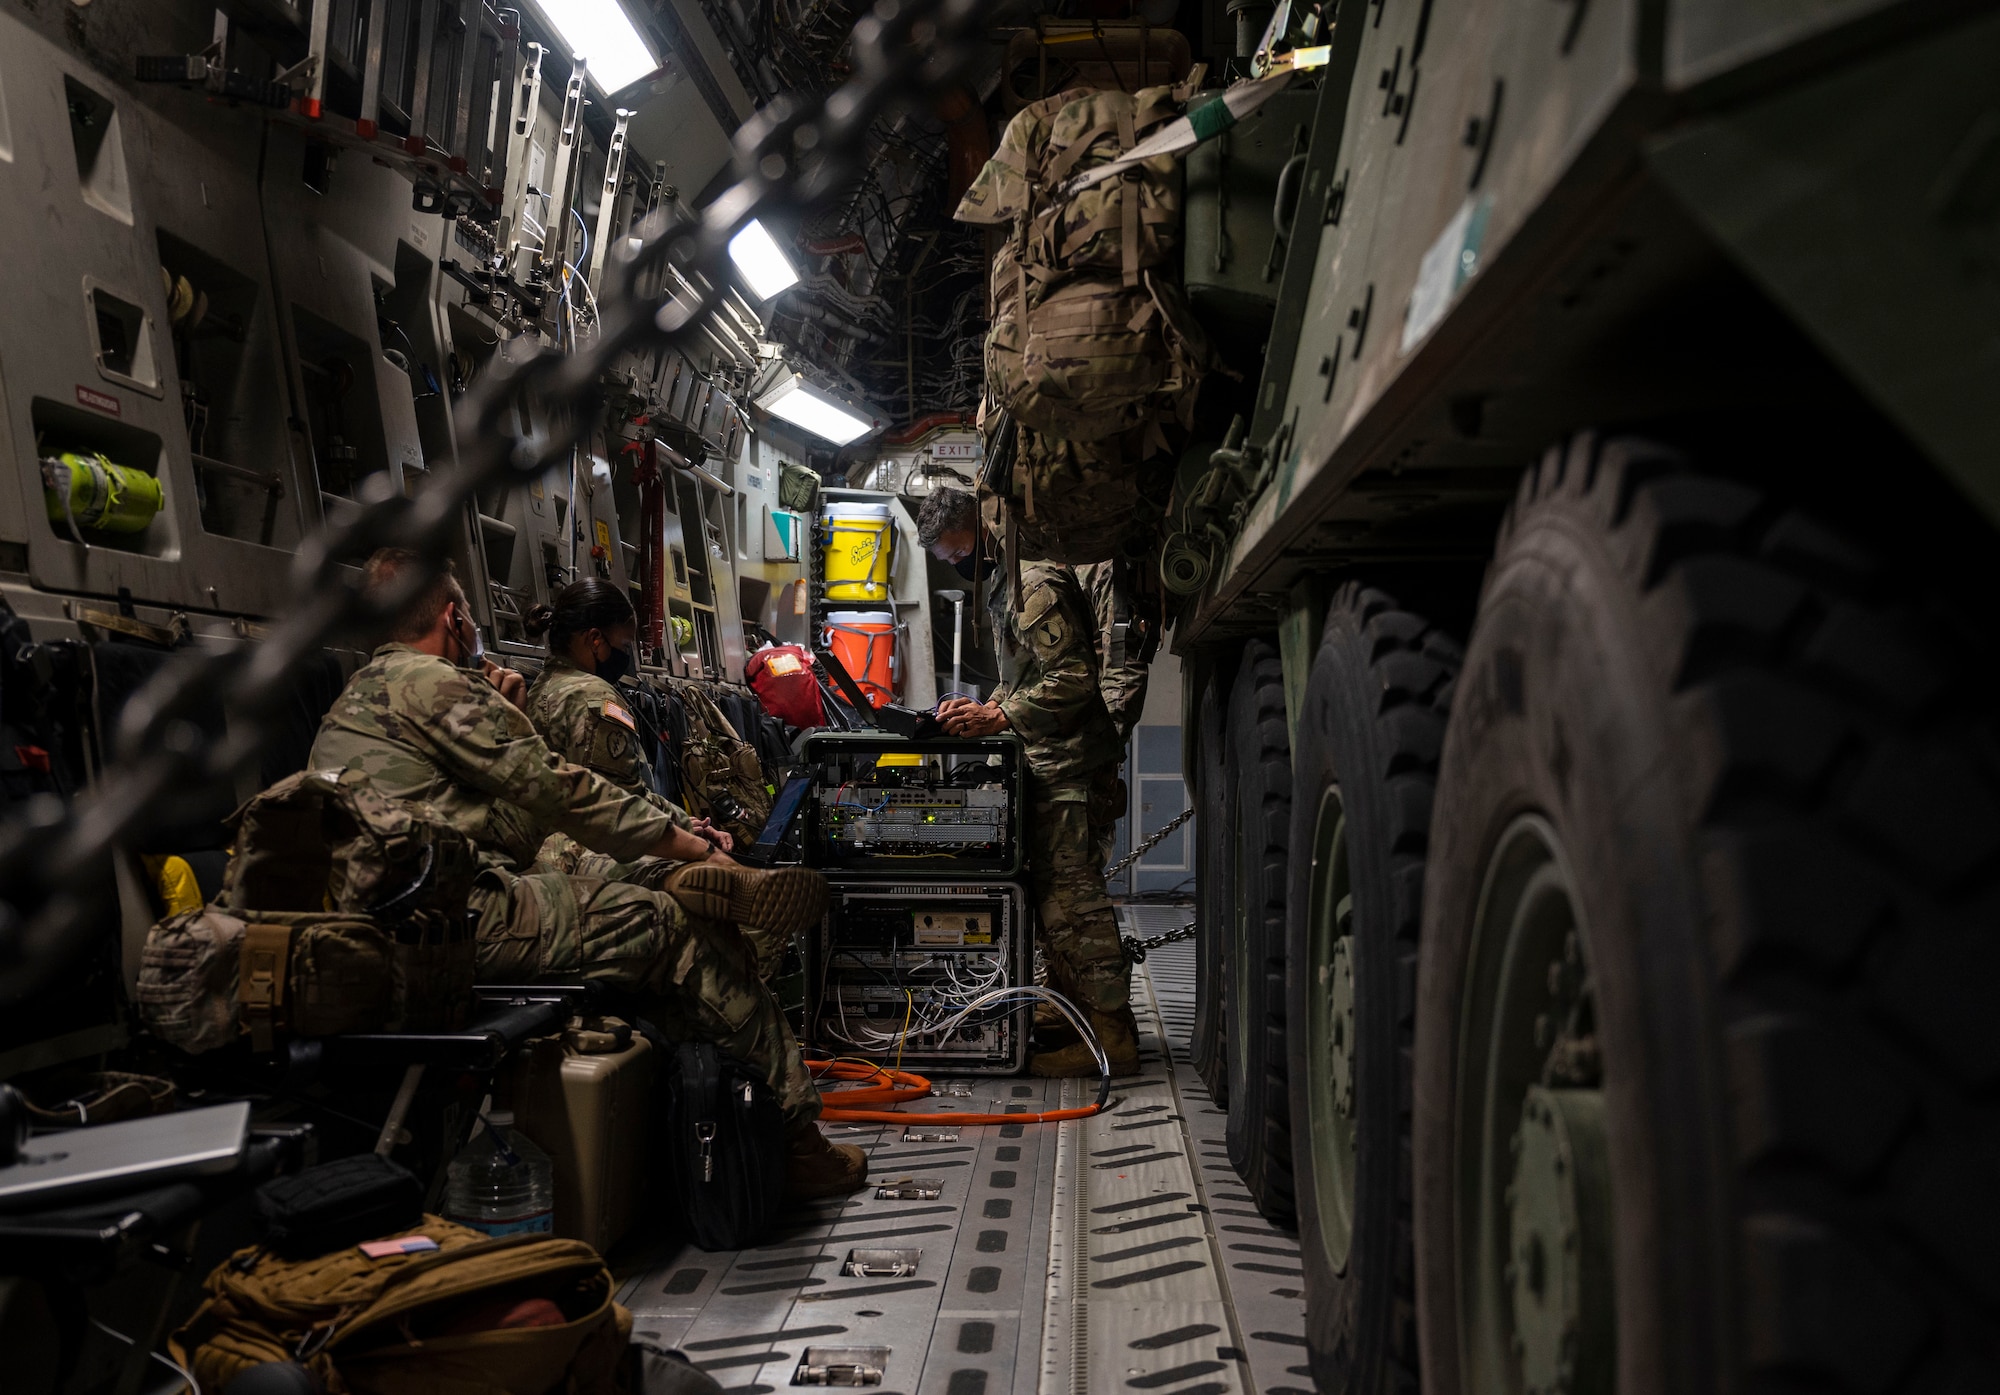 U.S. Soldiers with America’s I Corps set up and test a new, early entry command post concept aboard a C-17 Globemaster III while flying in the U.S. Indo-Pacific Command area of responsibility during Exercise Rainier War 21B Nov. 9, 2021. I Corps deployment and redeployment efforts from Andersen Air Force Base, Guam, included ensuring uninterrupted communication capabilities, even while in flight, aboard a C-17 Globemaster III. Rainier War 21B exercised and evaluated the 62nd Airlift Wing’s ability to employ the force and their ability to perform during wartime and contingency taskings in a high-intensity, wartime contested, degraded and operationally limited environment while supporting the contingency operations against a near-peer adversary in the U.S. Indo-Pacific Command area of responsibility. (U.S. Air Force photo by Staff Sgt. Rachel Williams)